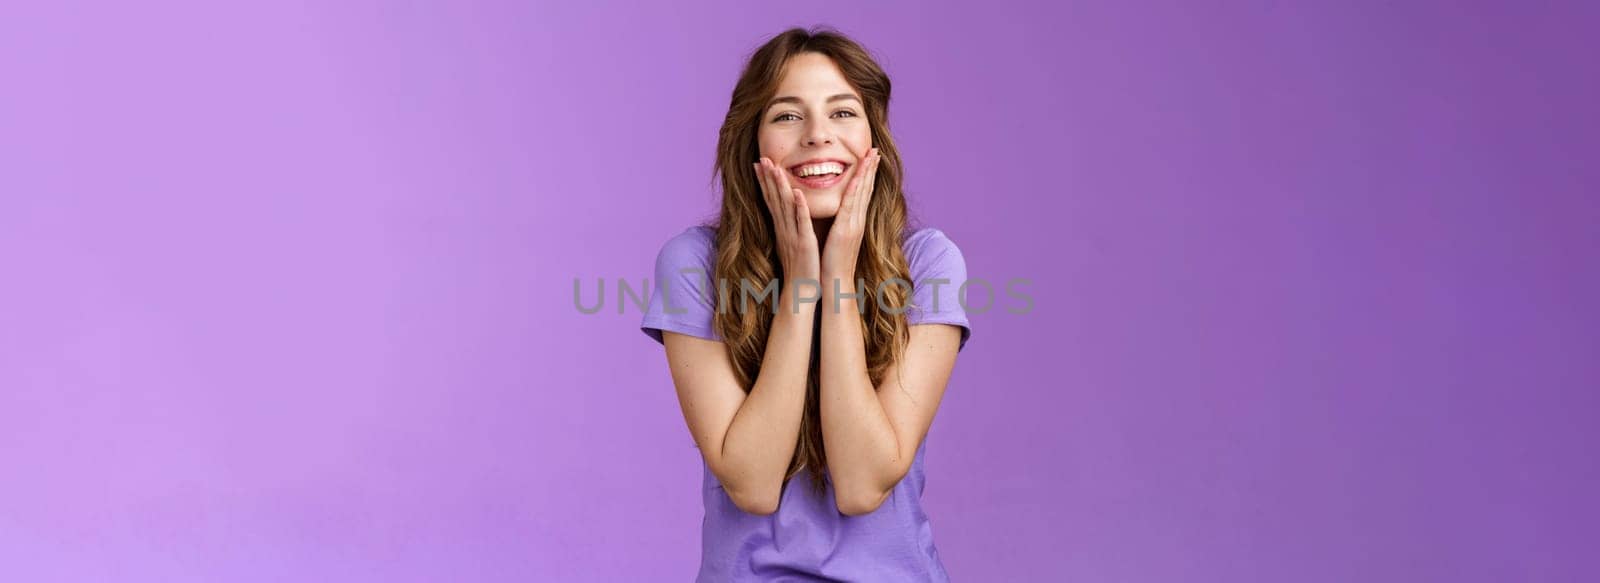 Cheerful lovely cute smiling happy girl grinning delighted touch cheeks having fun enjoy summer warm days look happily express positivity friendship stand purple background. Copy space